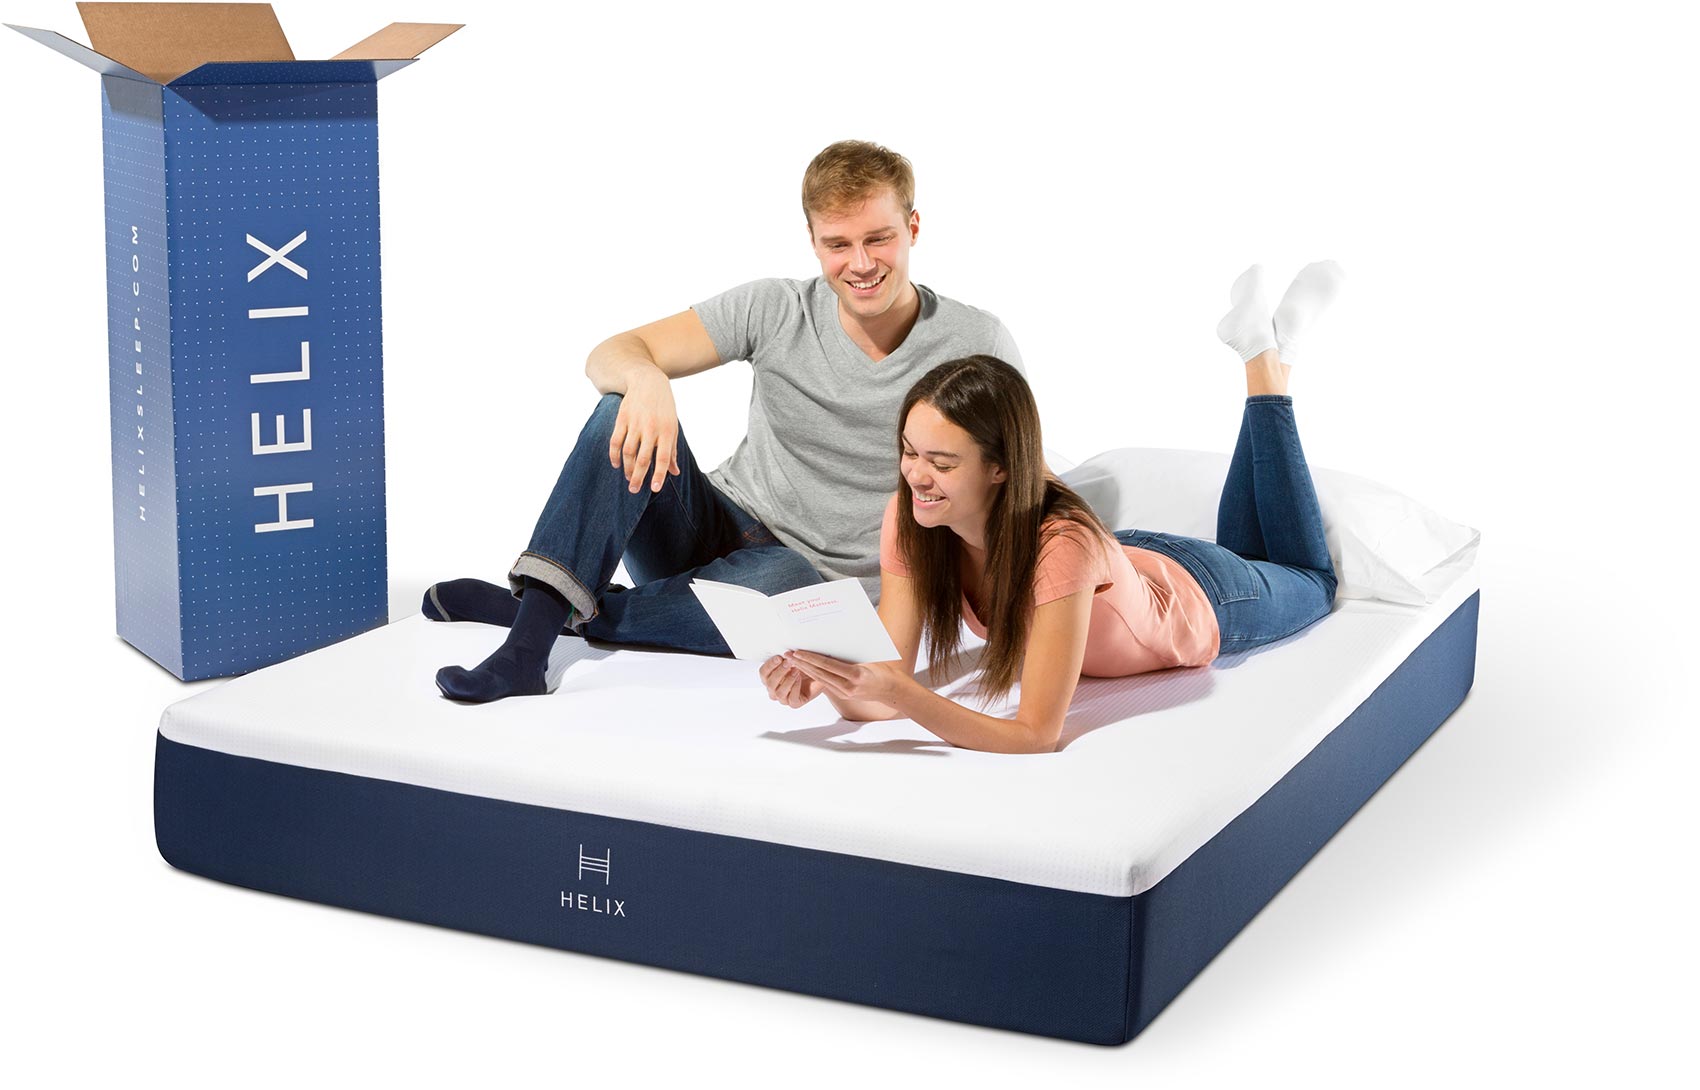 Helix Bed Review and Rating Guide